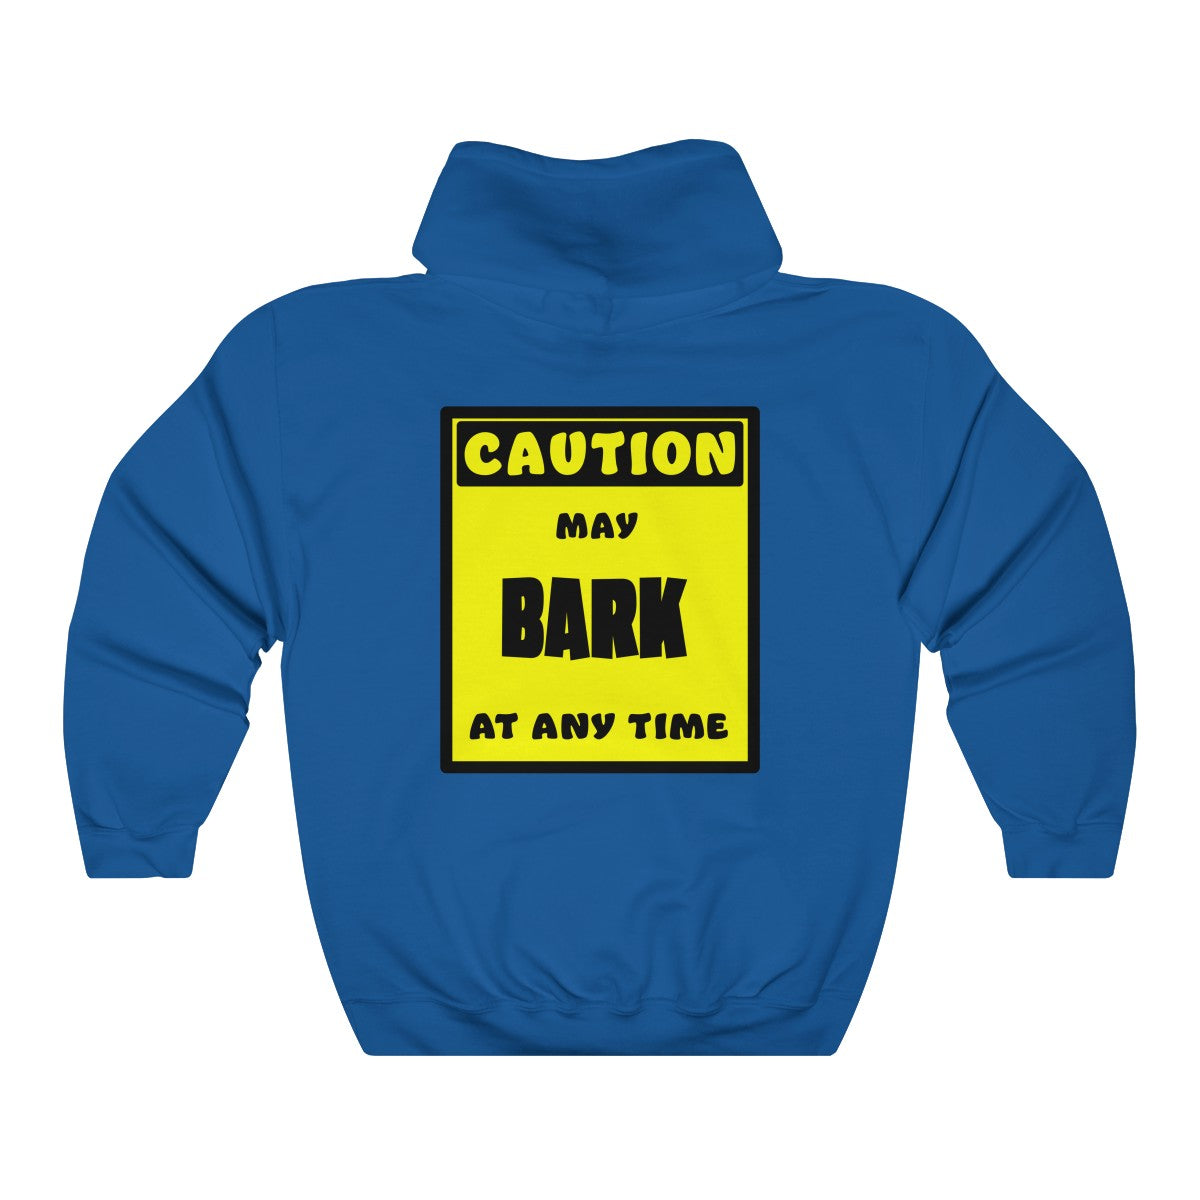 CAUTION! May BARK at any time! - Hoodie Hoodie AFLT-Whootorca Royal Blue S 